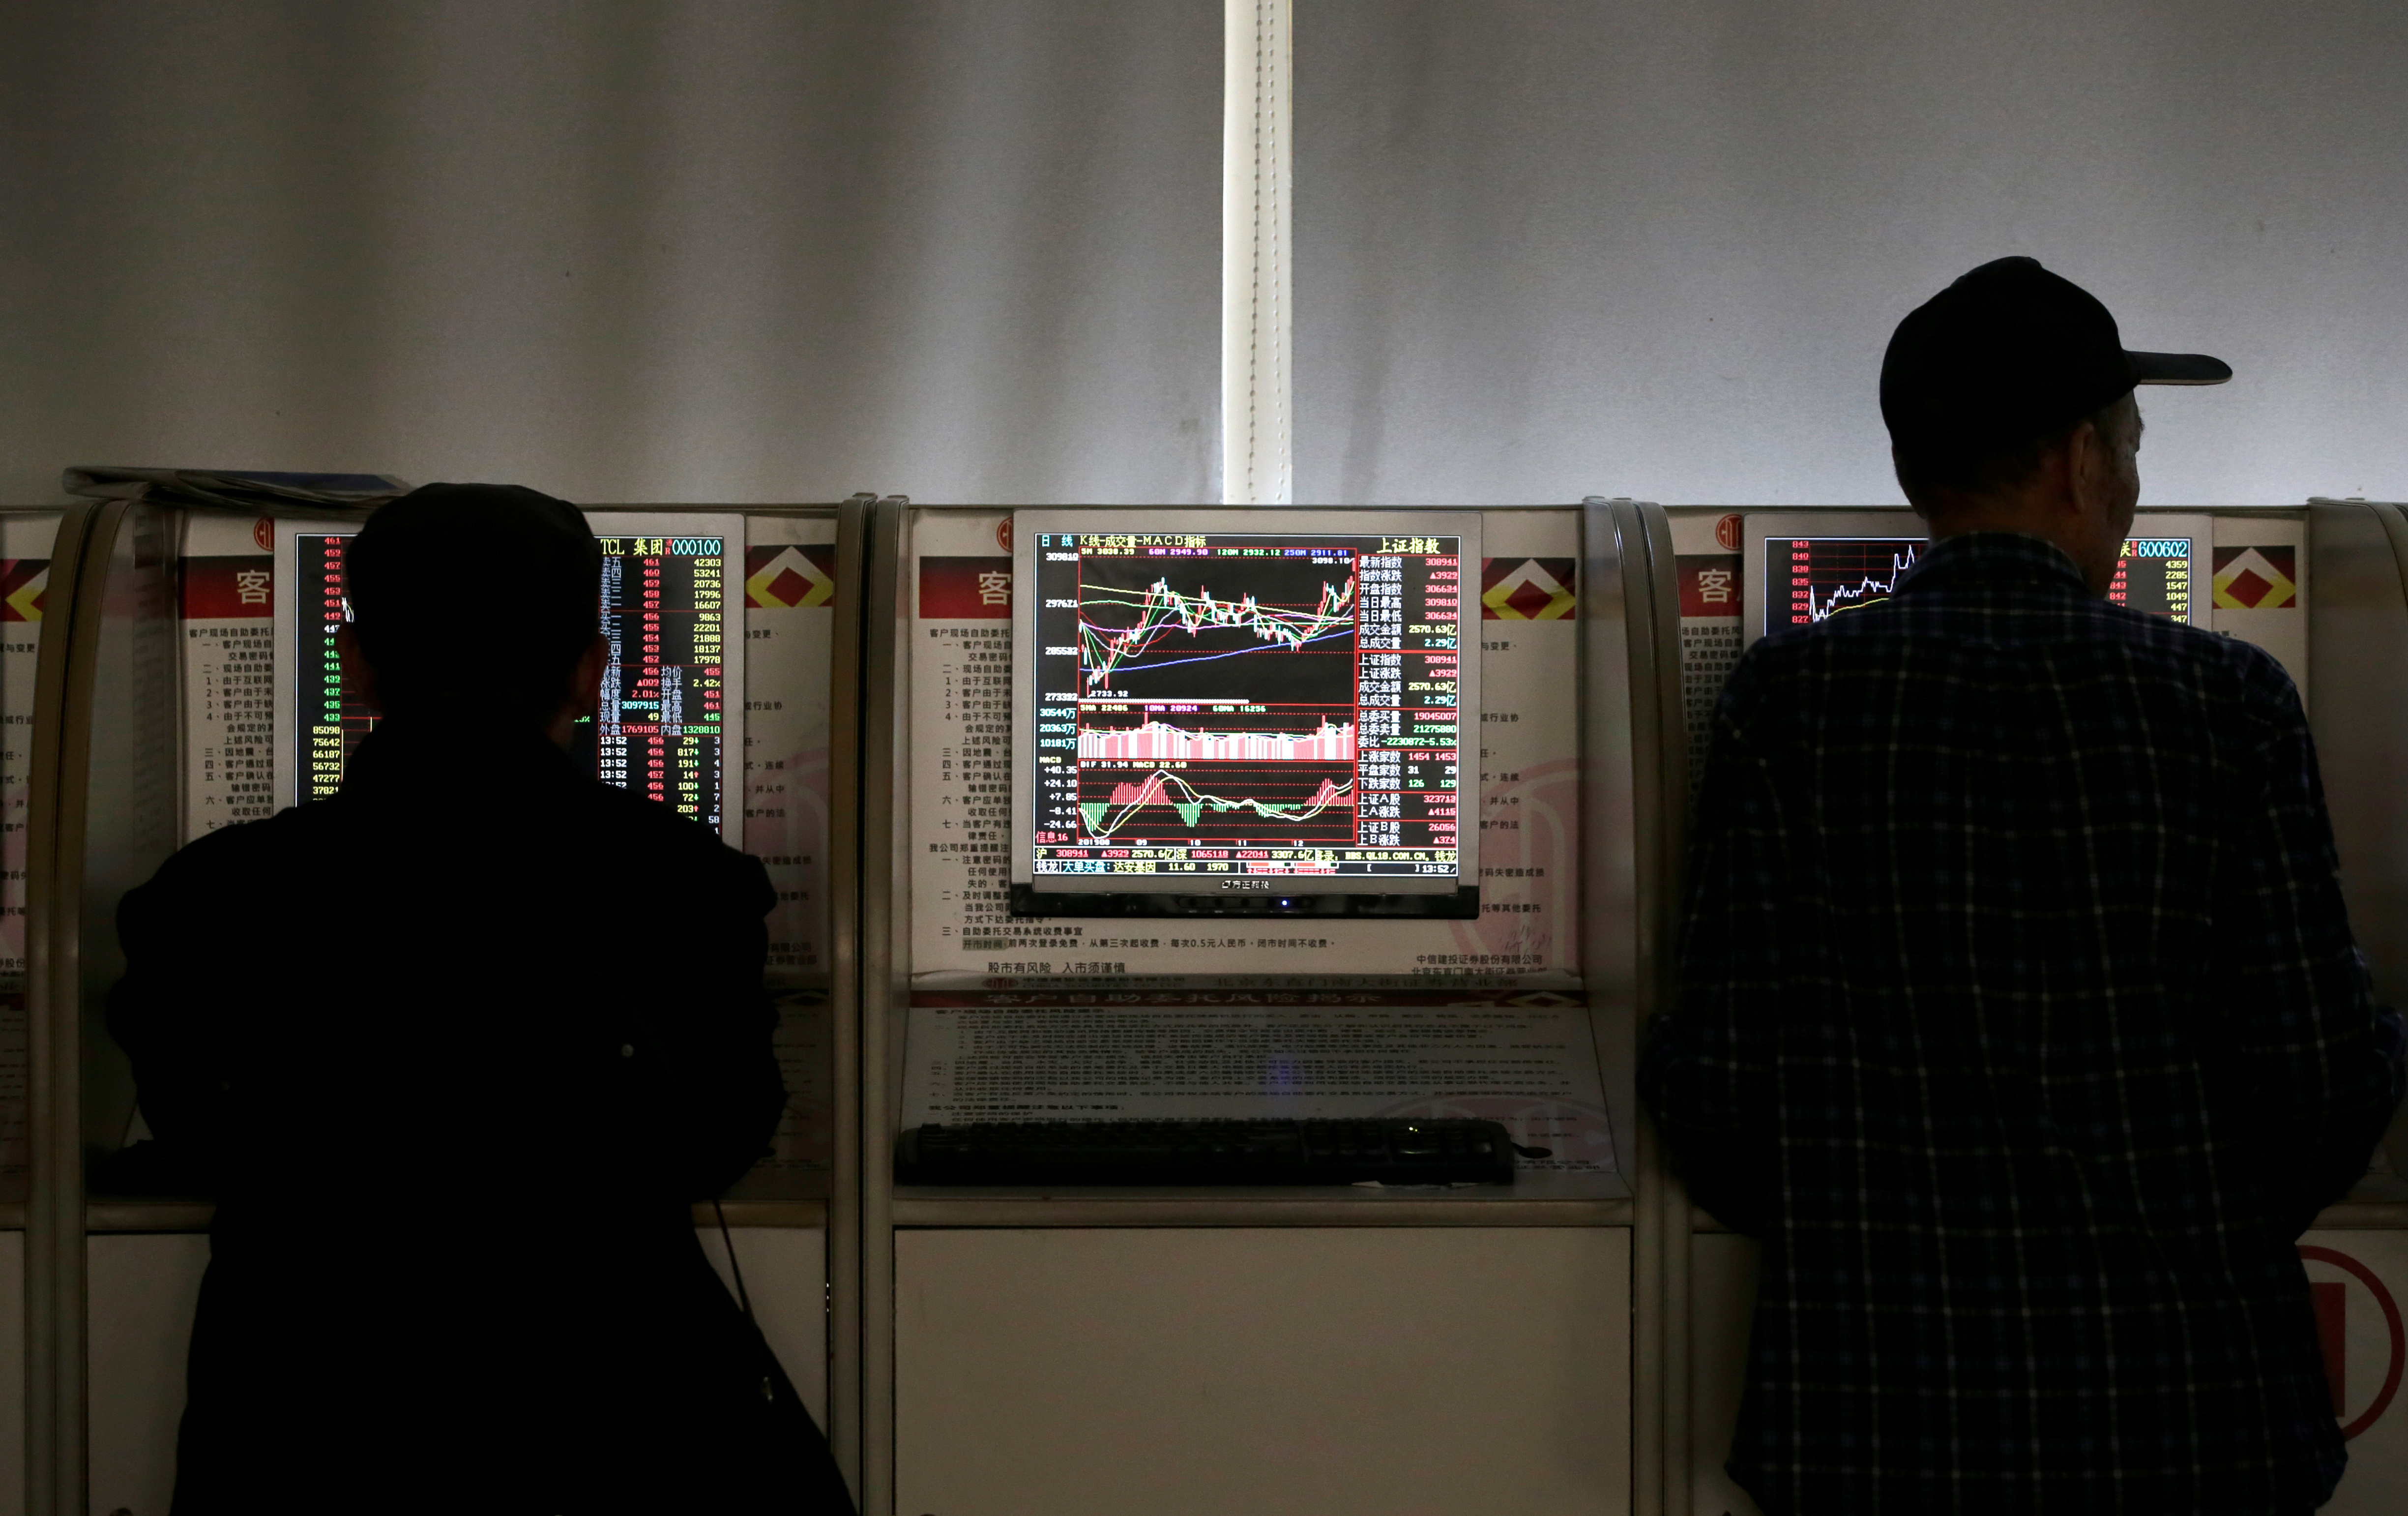 Investors check share prices at a brokerage office in Beijing, China January 2, 2020. REUTERS/Jason Lee